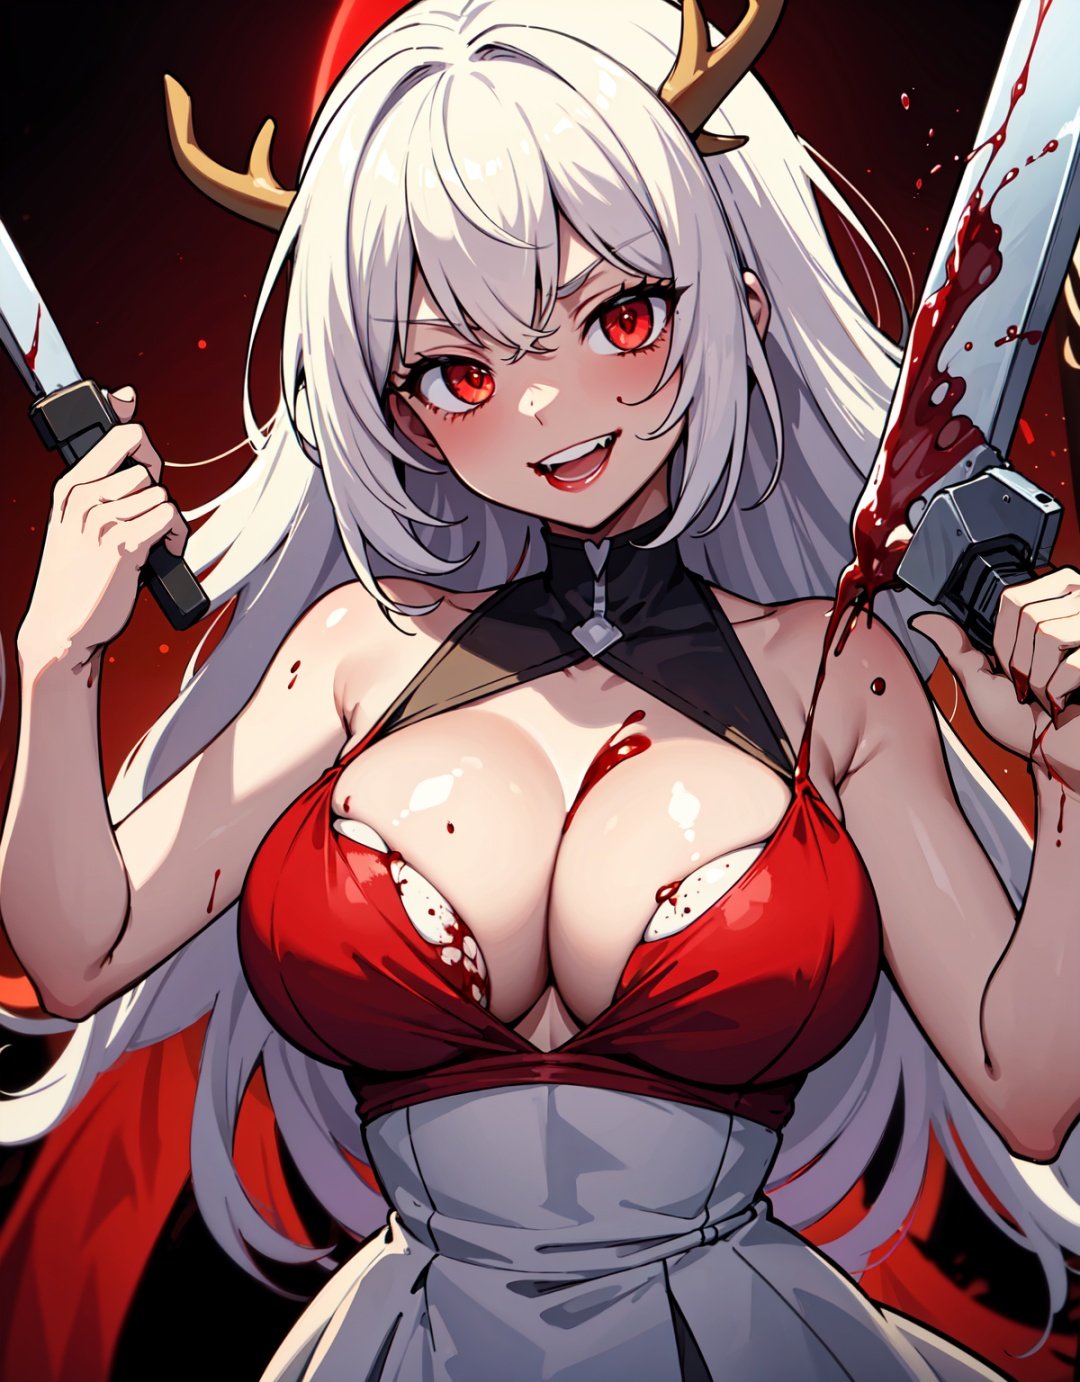 masterpiece, best quality, 1girl, windigo girl, bloody antlers, psychotic, crazy, holding a knife, wearing a white dress, with white hair, messy hair, big boobs, red glowing eyes, big smile, bleeding, with blood stains on her dress, with blood stains on her skin, menacing pose, dark background, night time, glowing blood moon in the background, masterpiece,